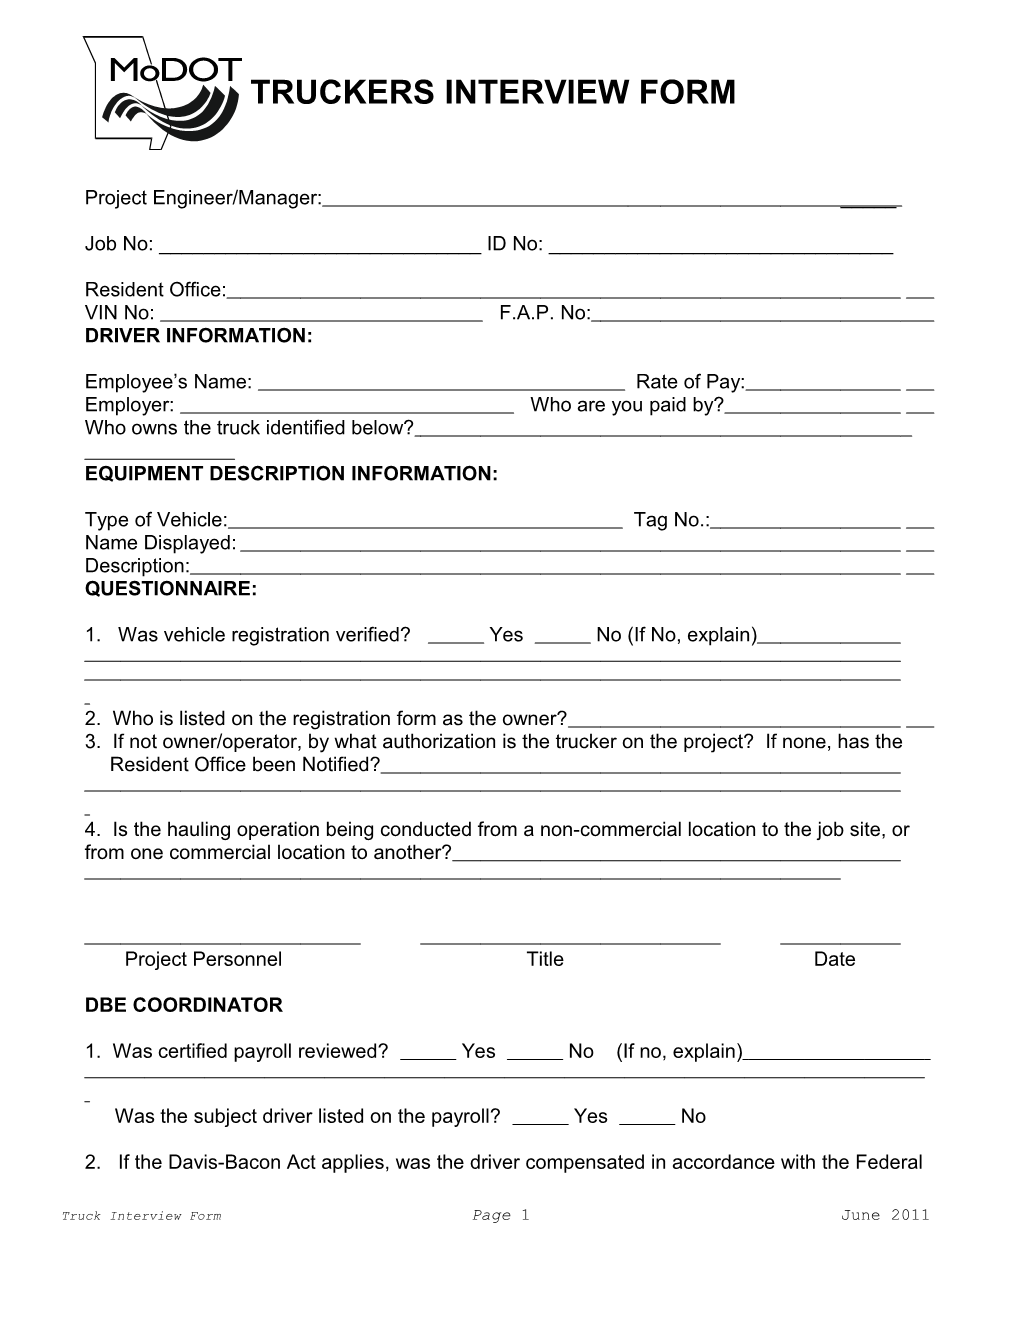 Truckers Interview Form